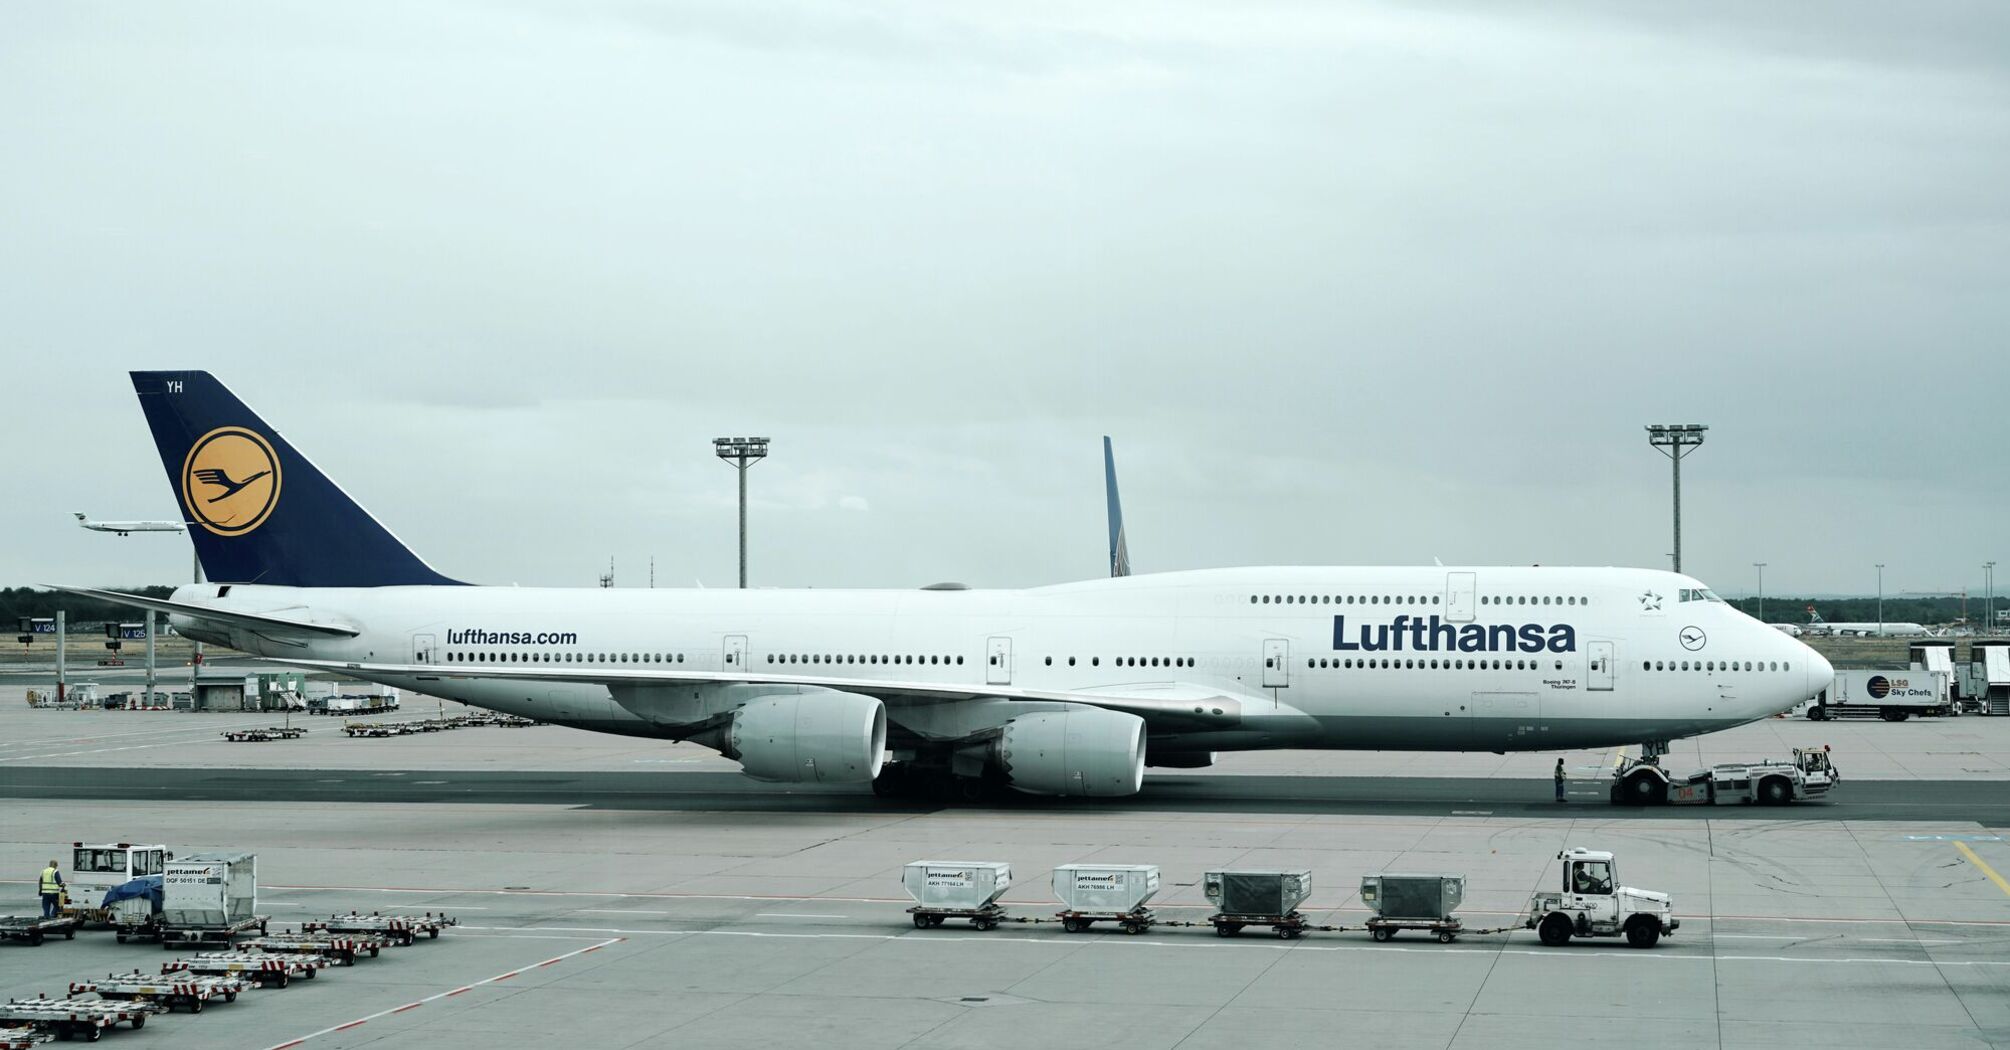 Lufthansa Boeing parked at an airport gate